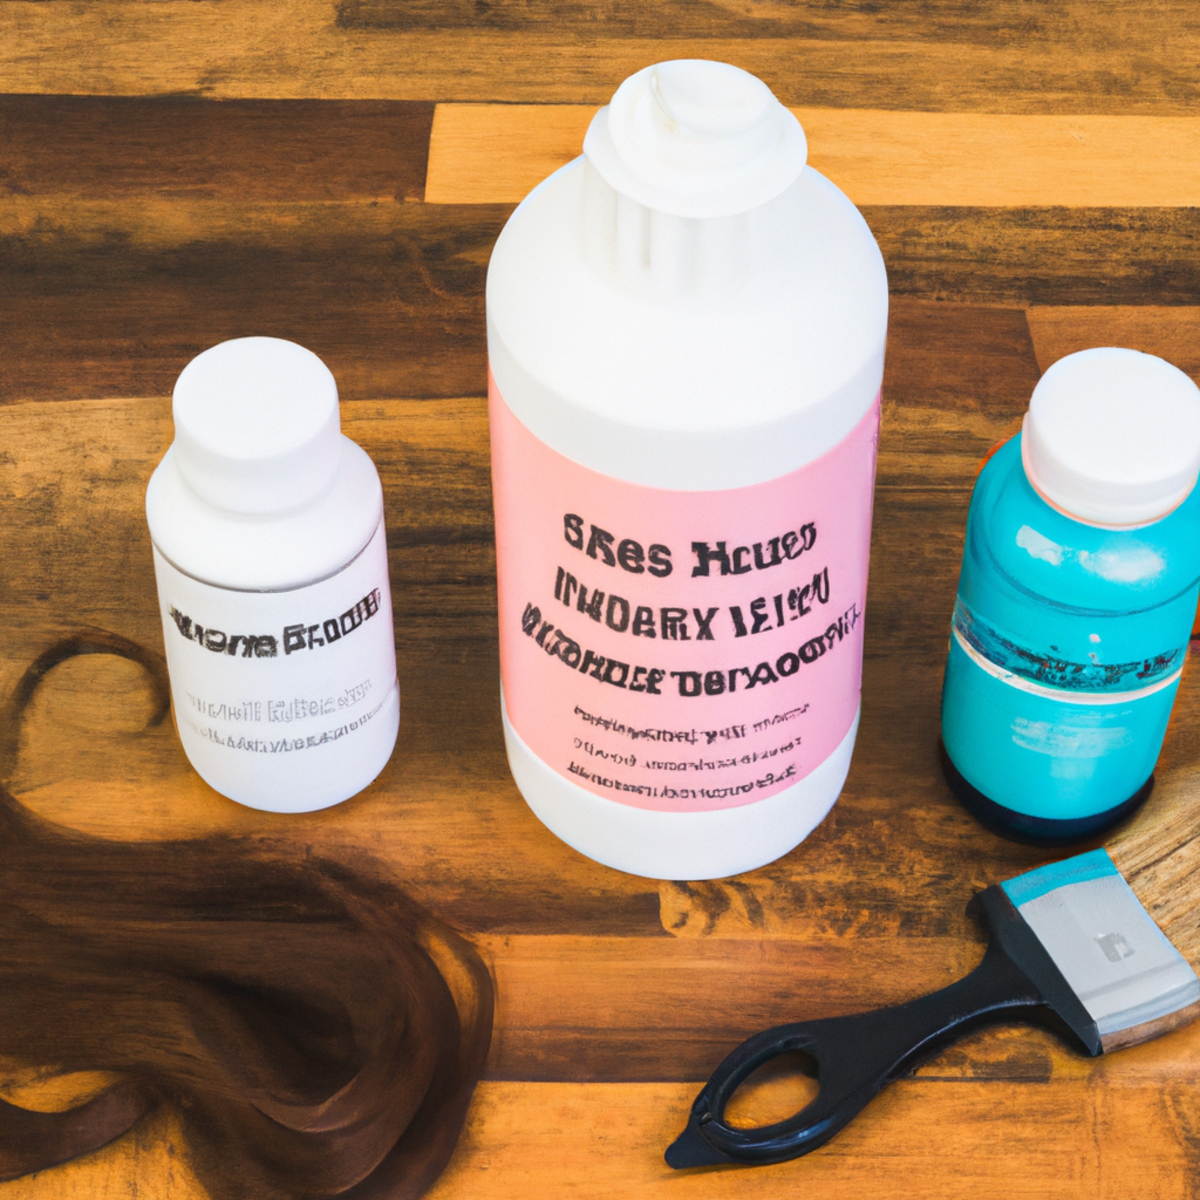 Hair care products on wooden table, including protein treatment and deep conditioning mask, emphasizing balance between protein and moisture for damaged hair.